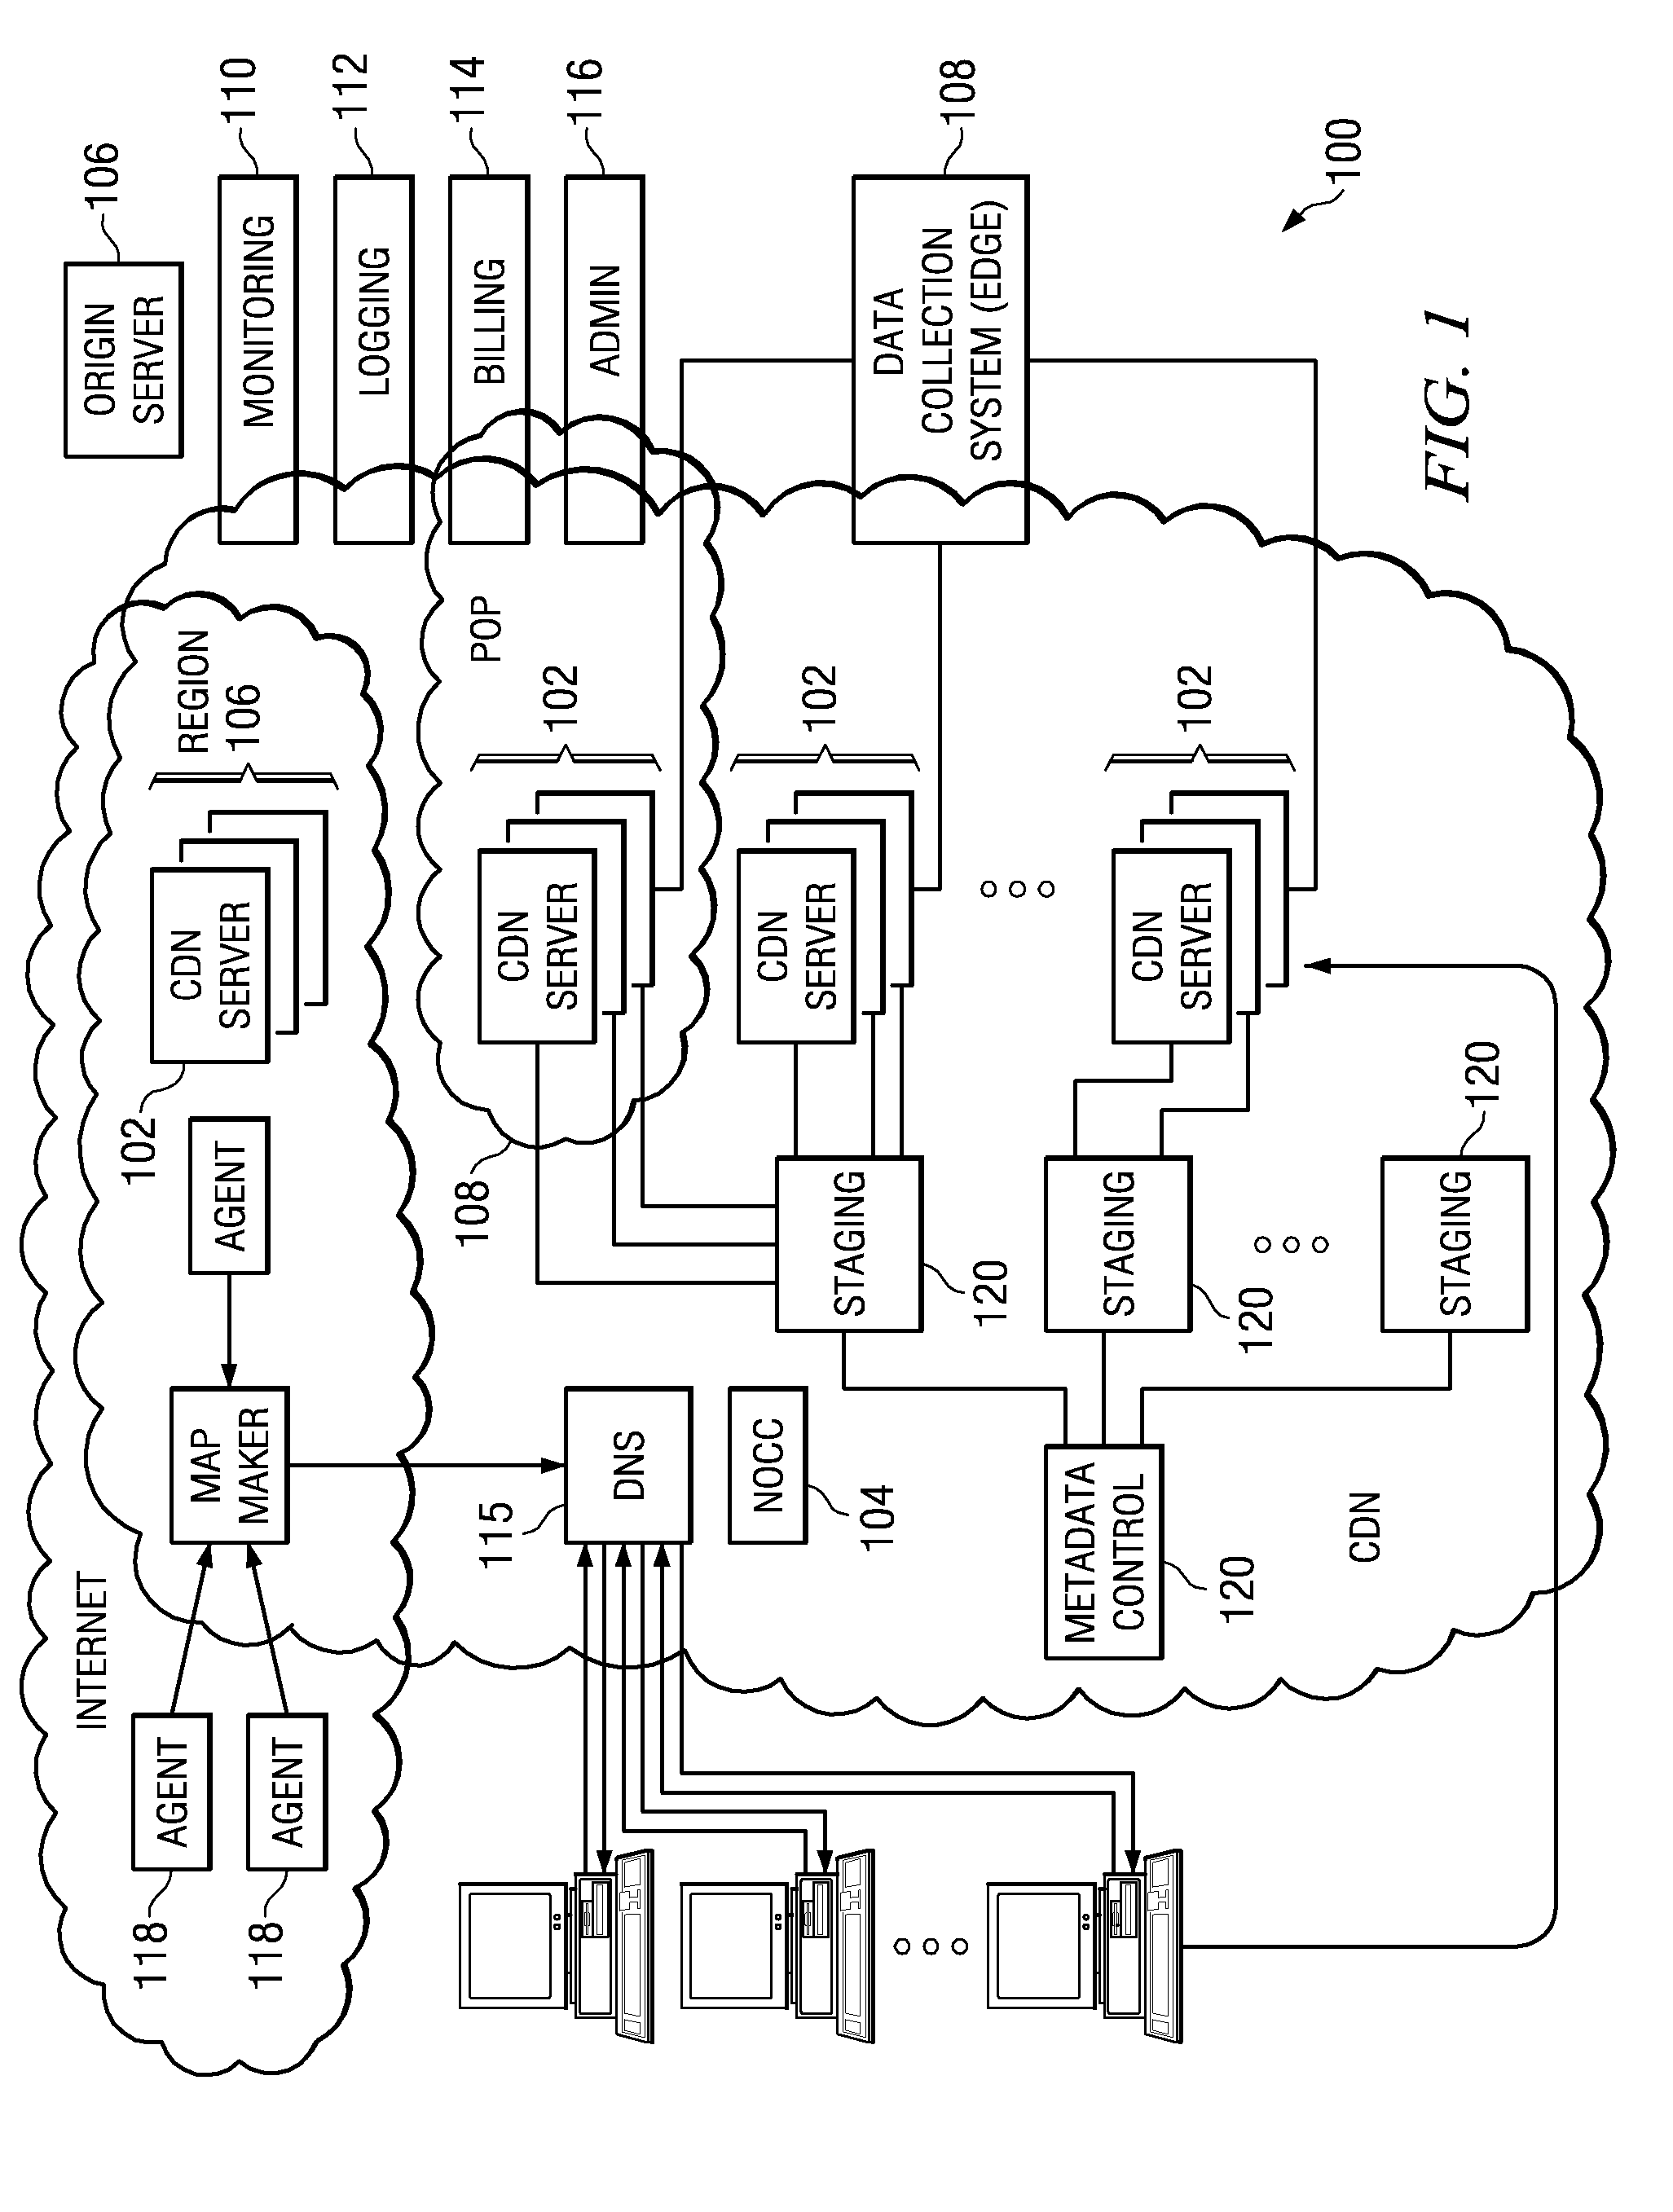 Method of data collection among participating content providers in a distributed network